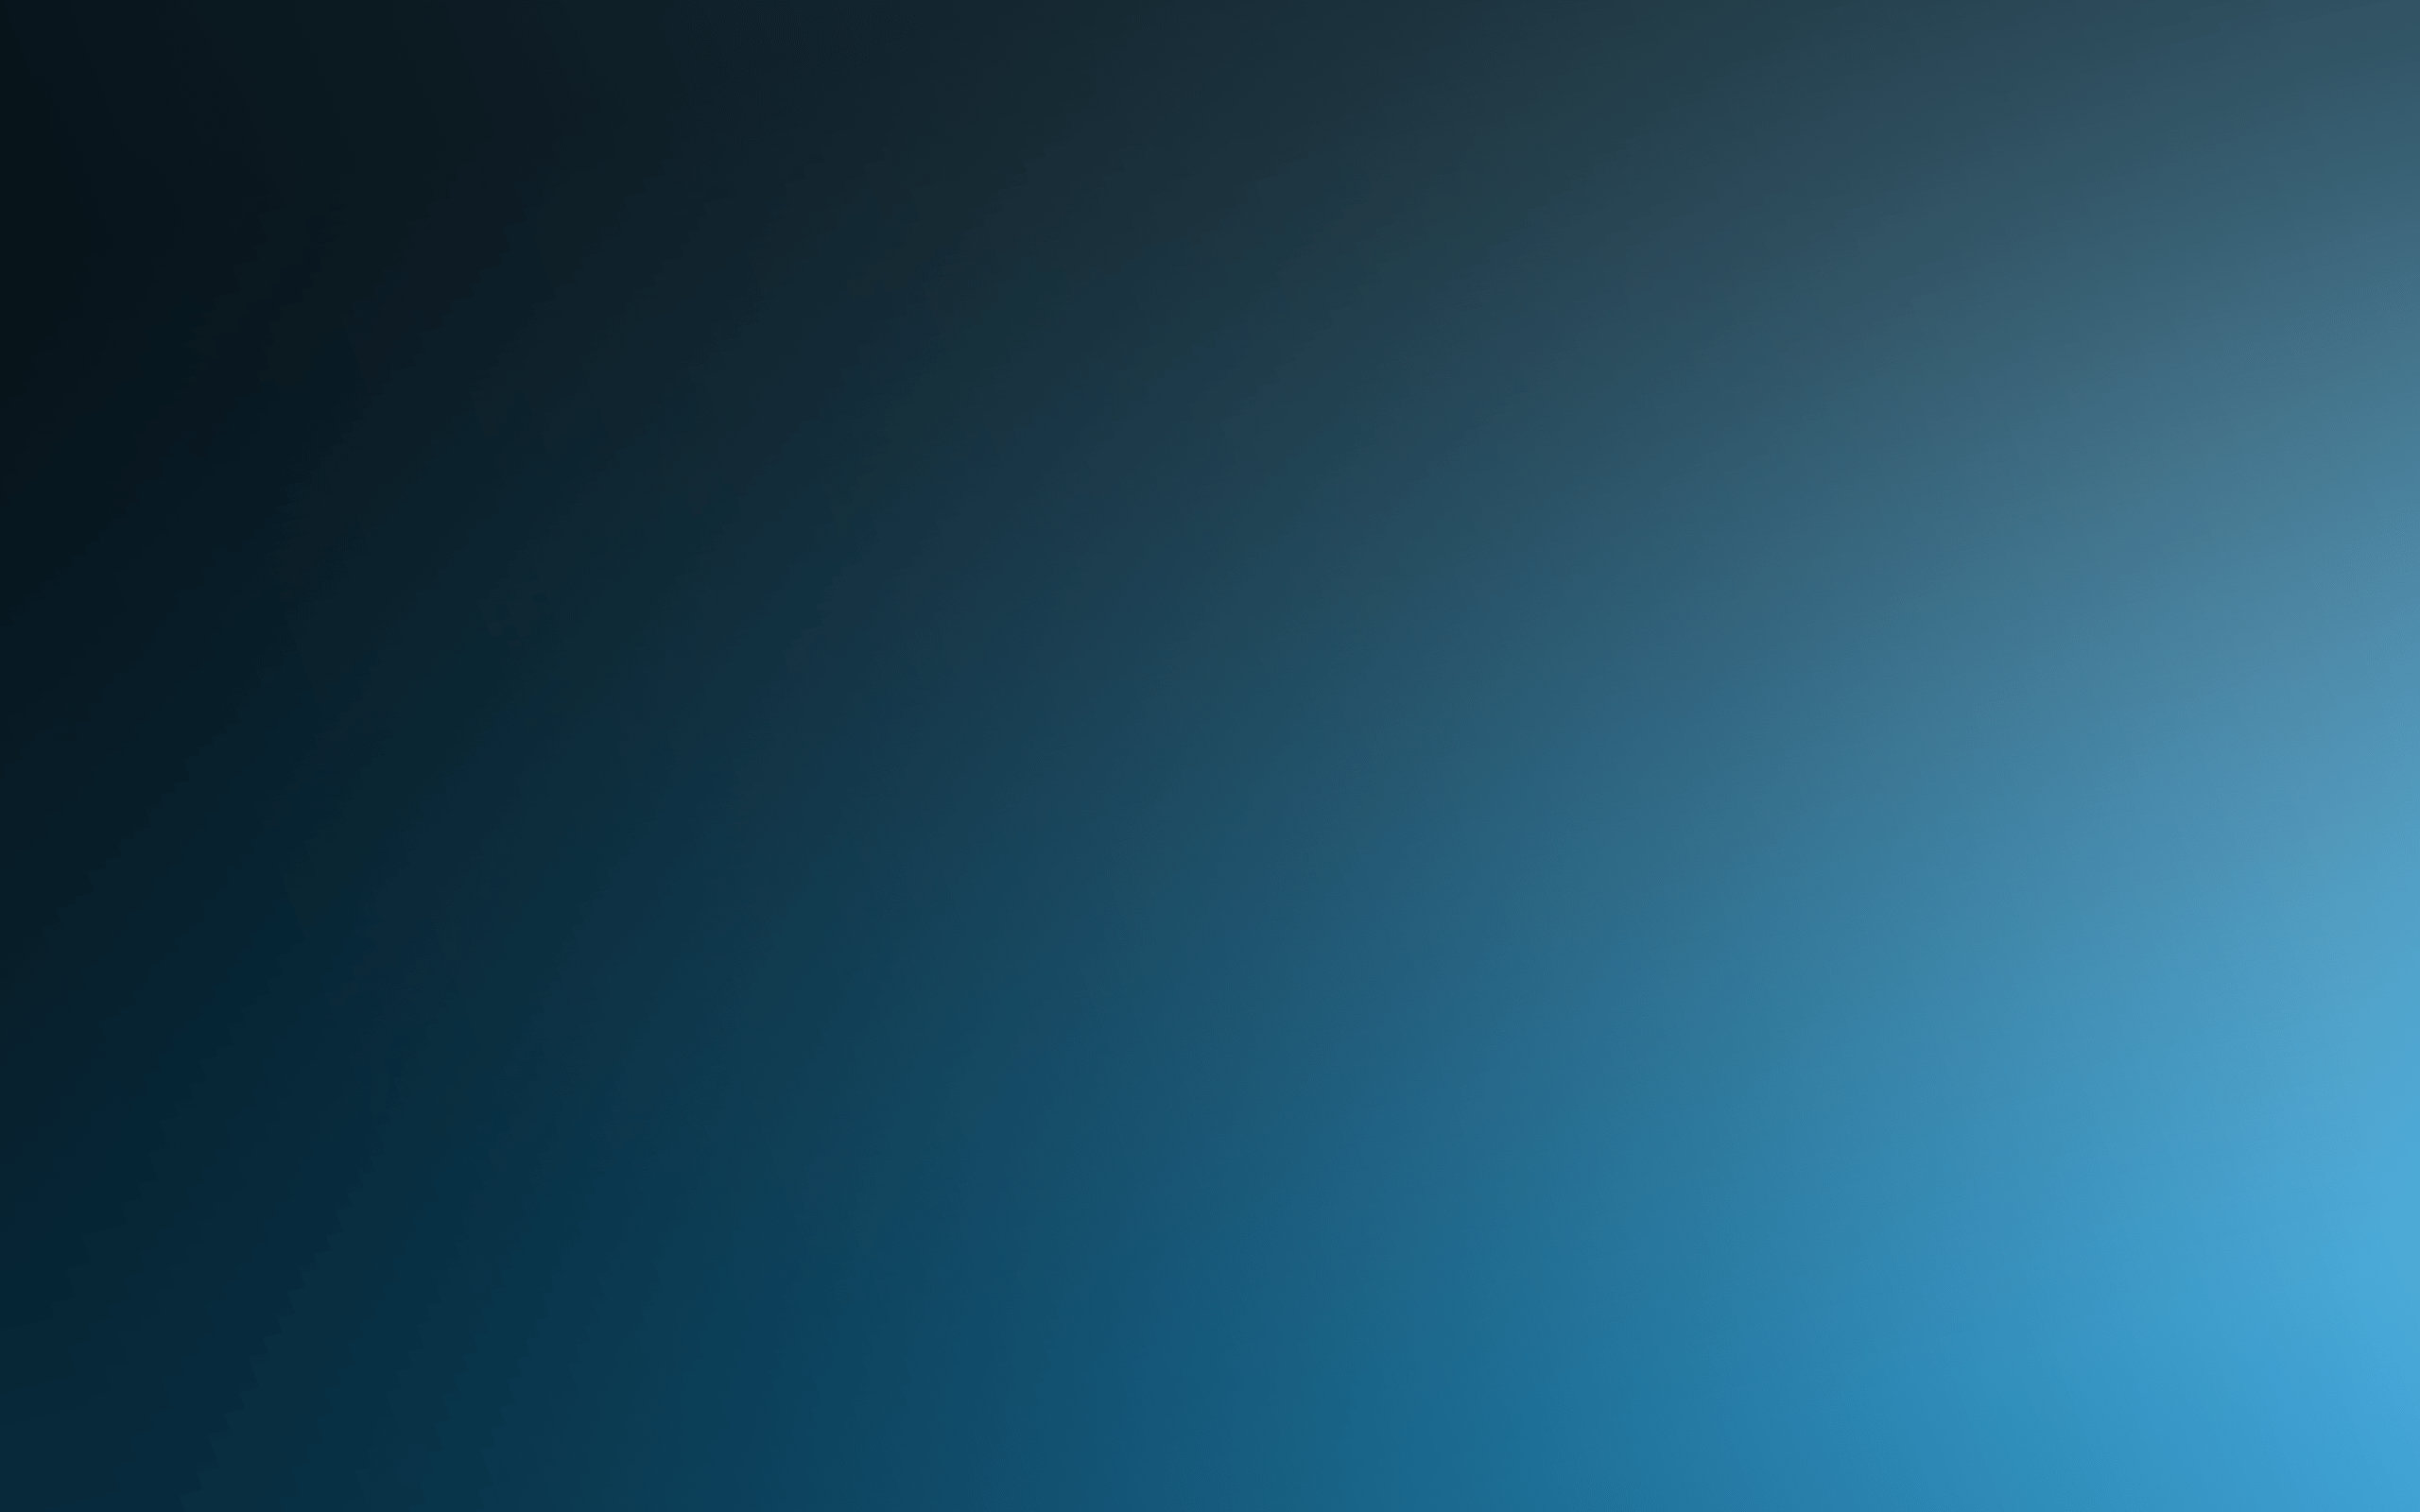 Gradient Background Images HD Pictures and Wallpaper For Free Download   Pngtree